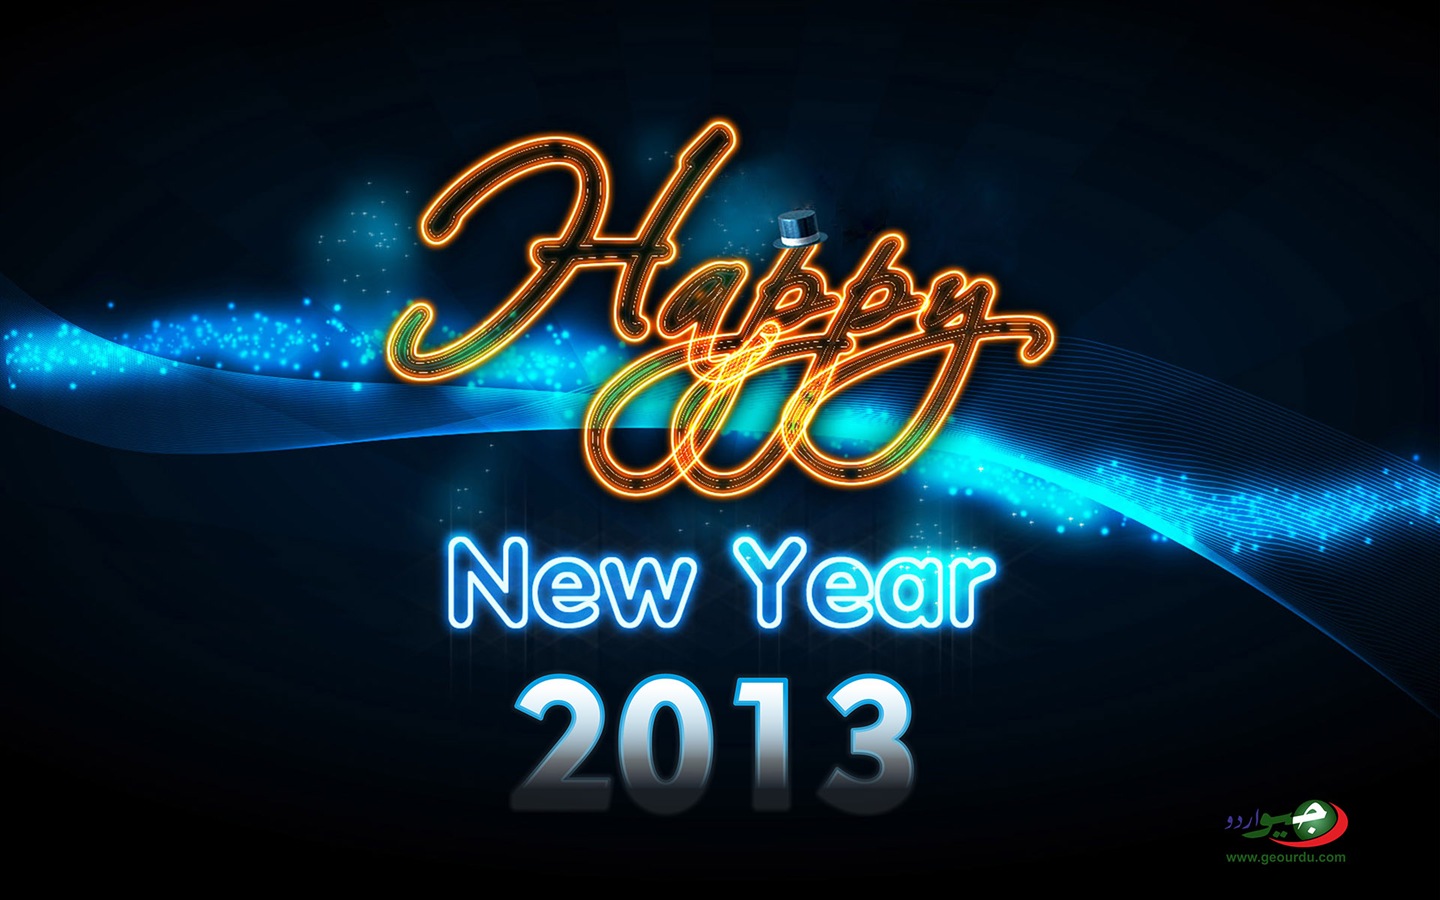 2013 Happy New Year HD wallpapers #17 - 1440x900